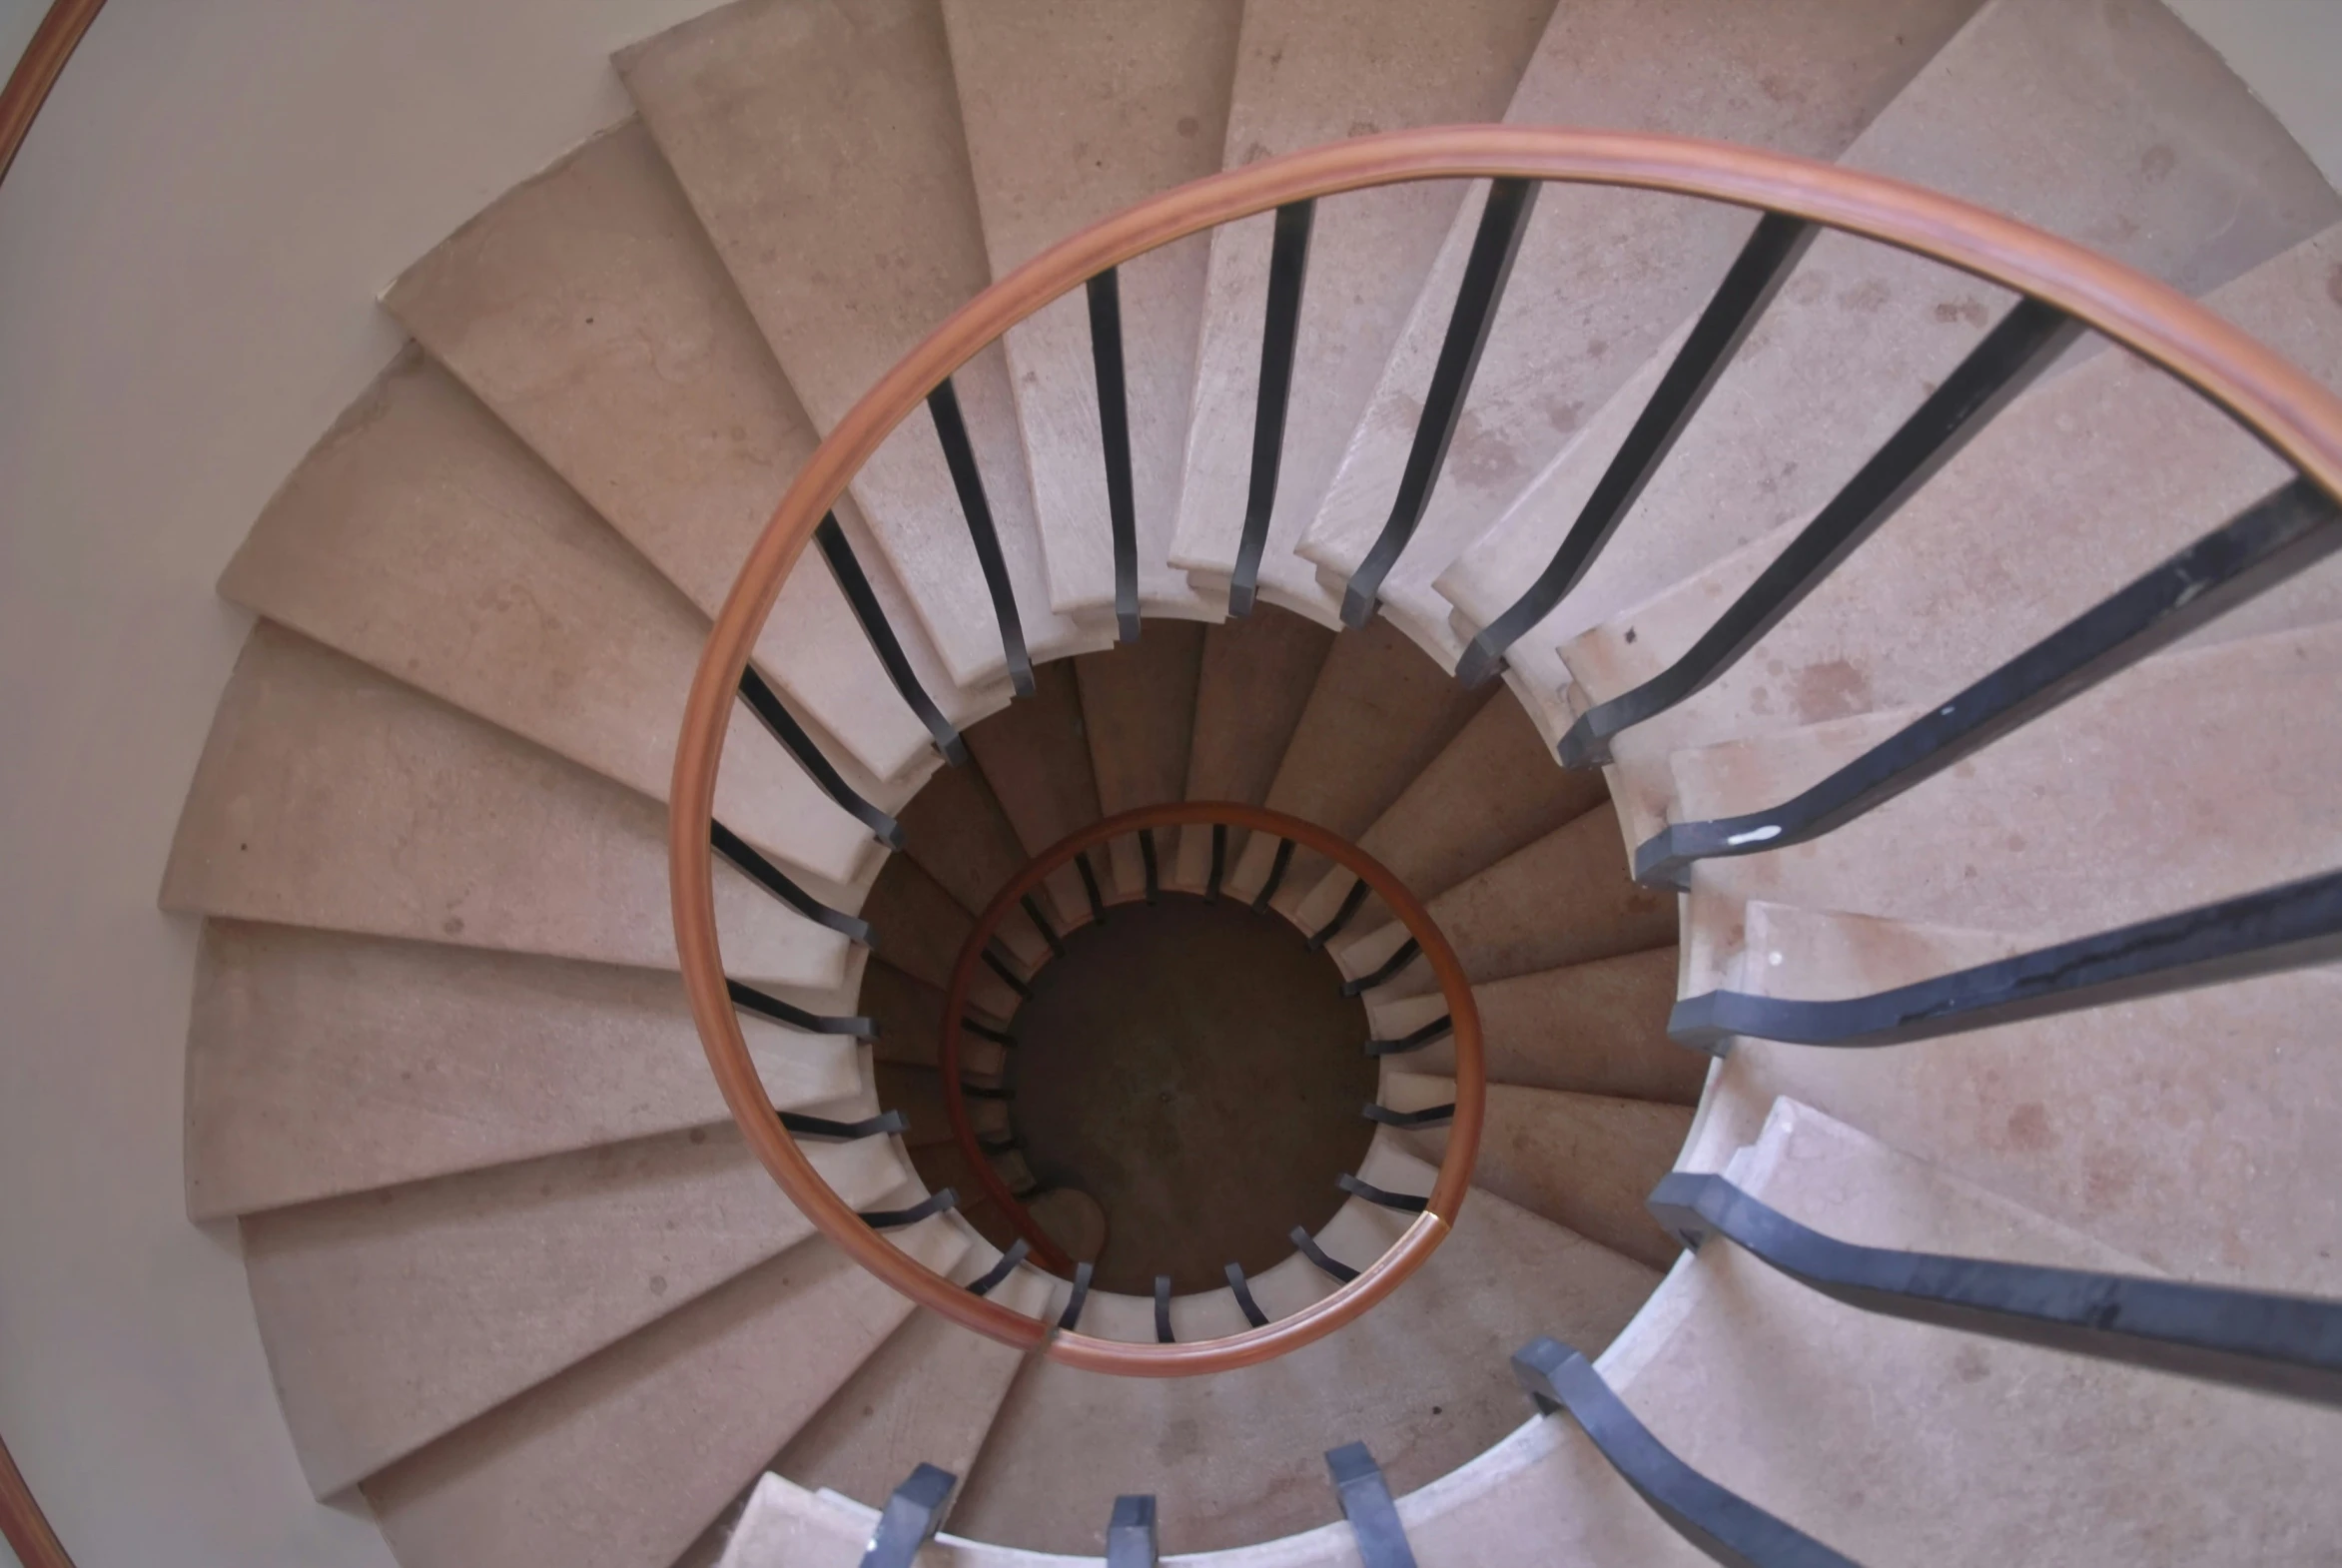 a spiral stair case is shown with white marble and blue stripes